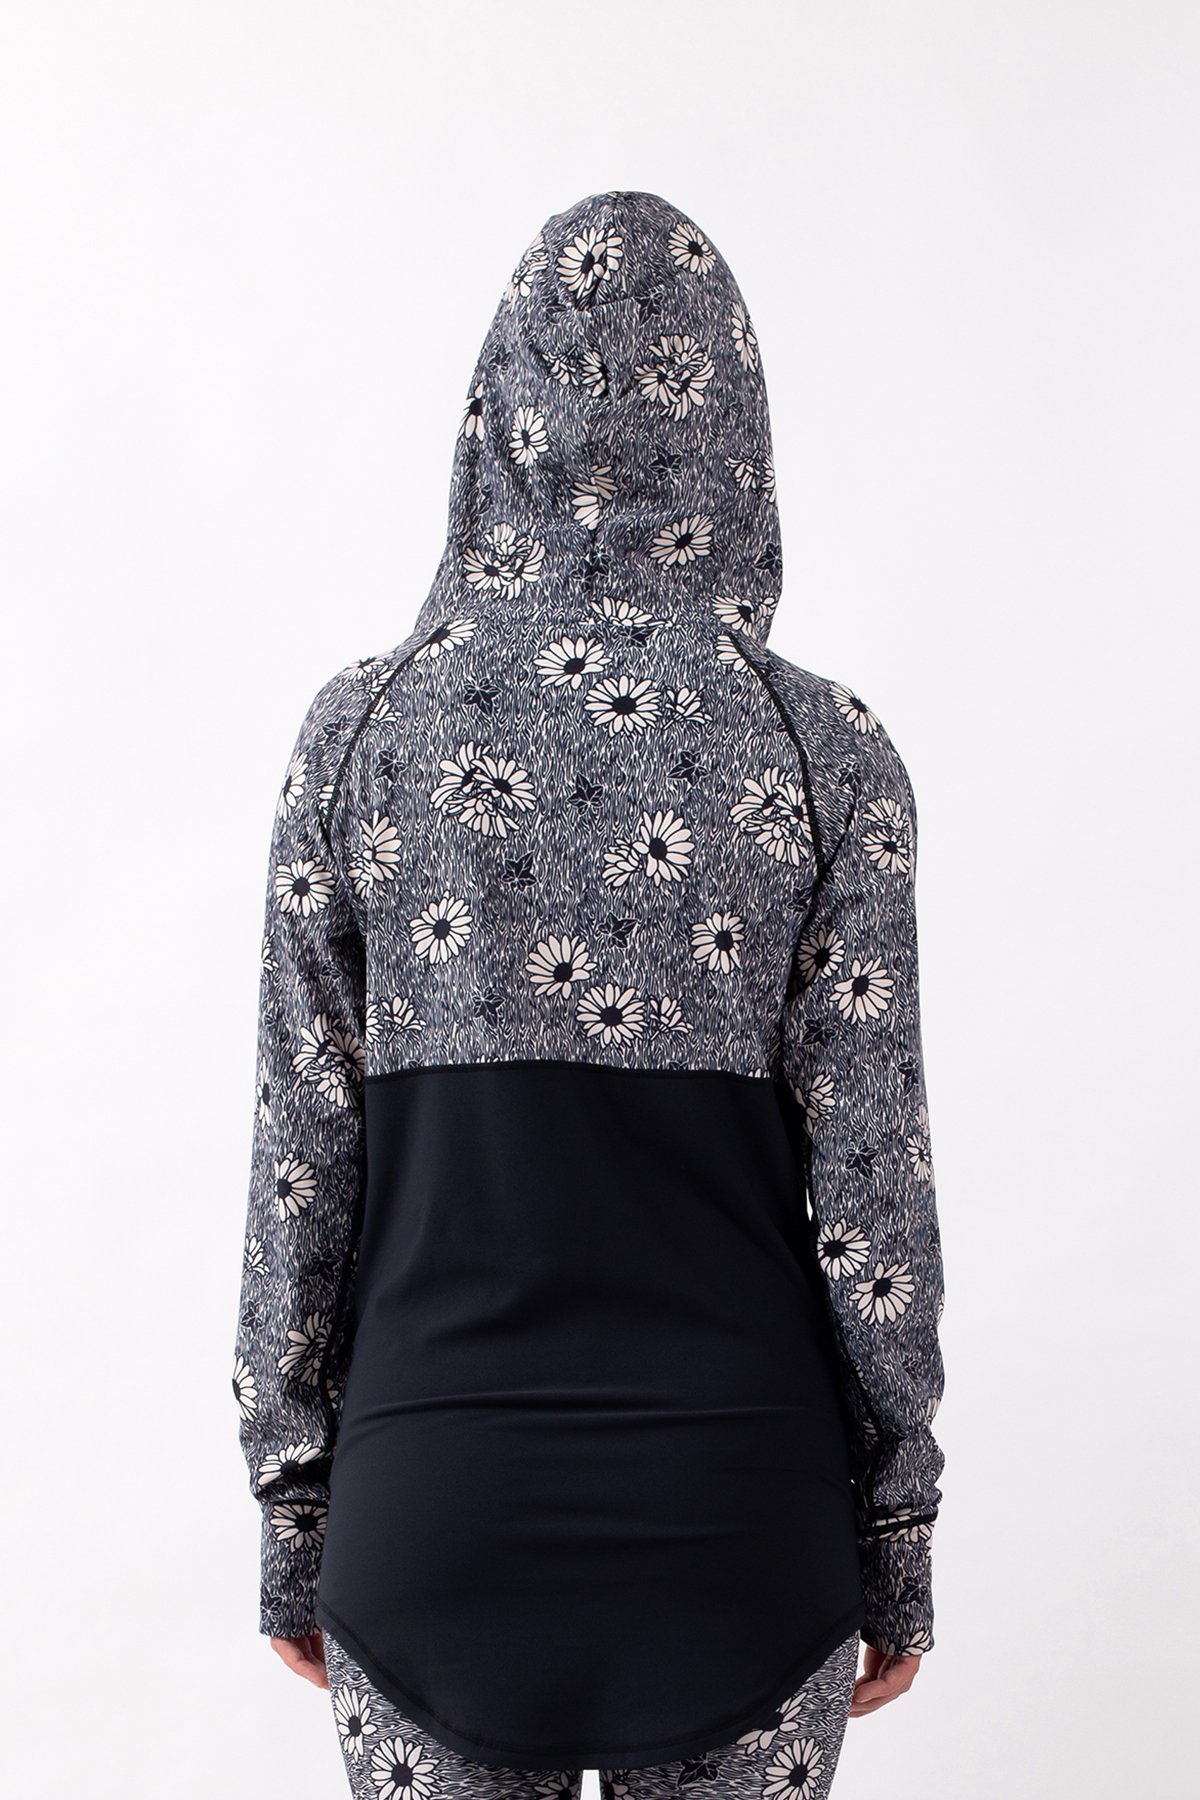 Base Layer | Icecold Hoodie Top - Ivy Blossom | S